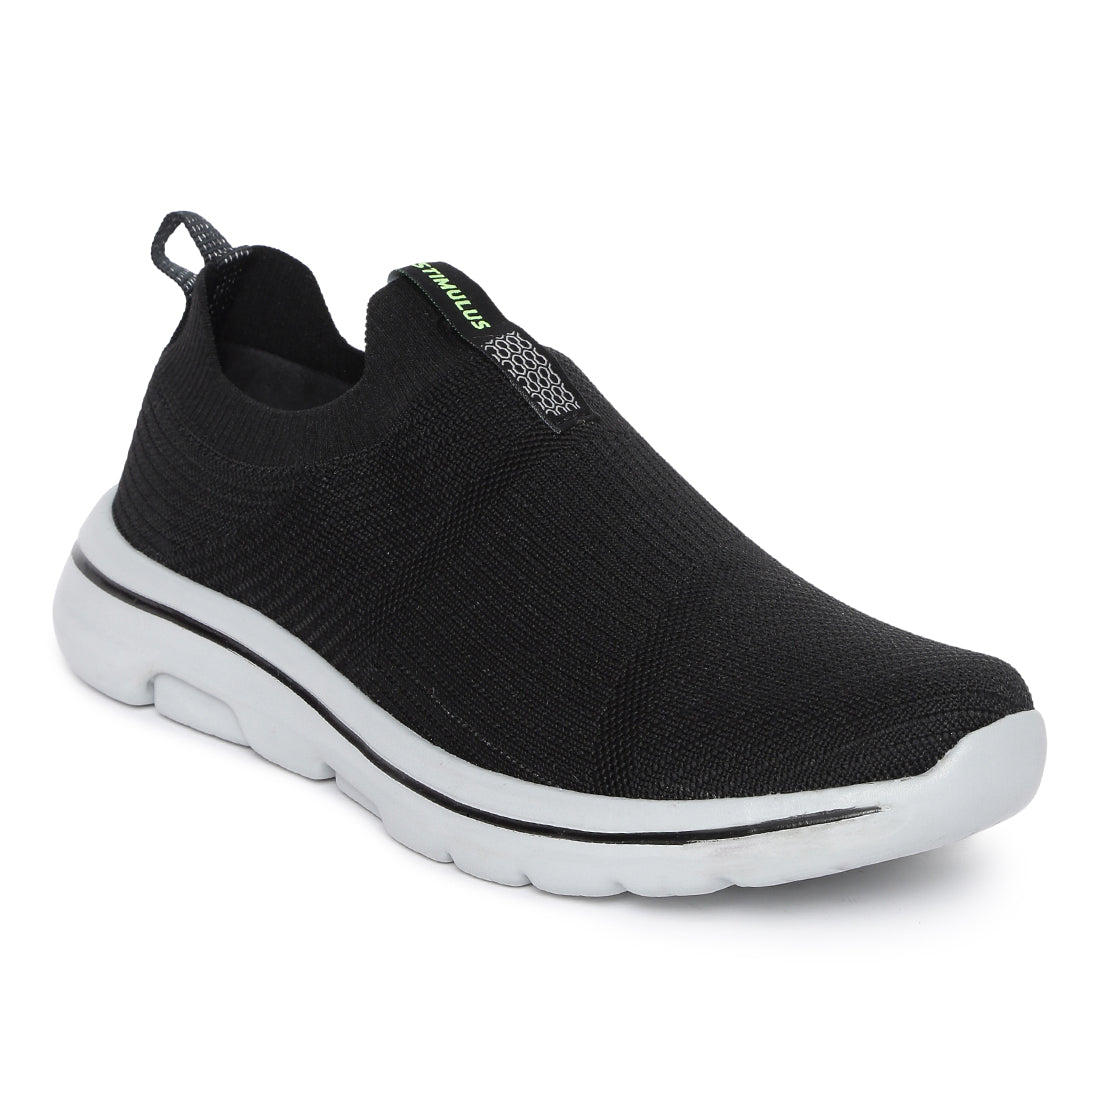 Paragon Stimulus Casual Black Knitted Training Shoes for Men